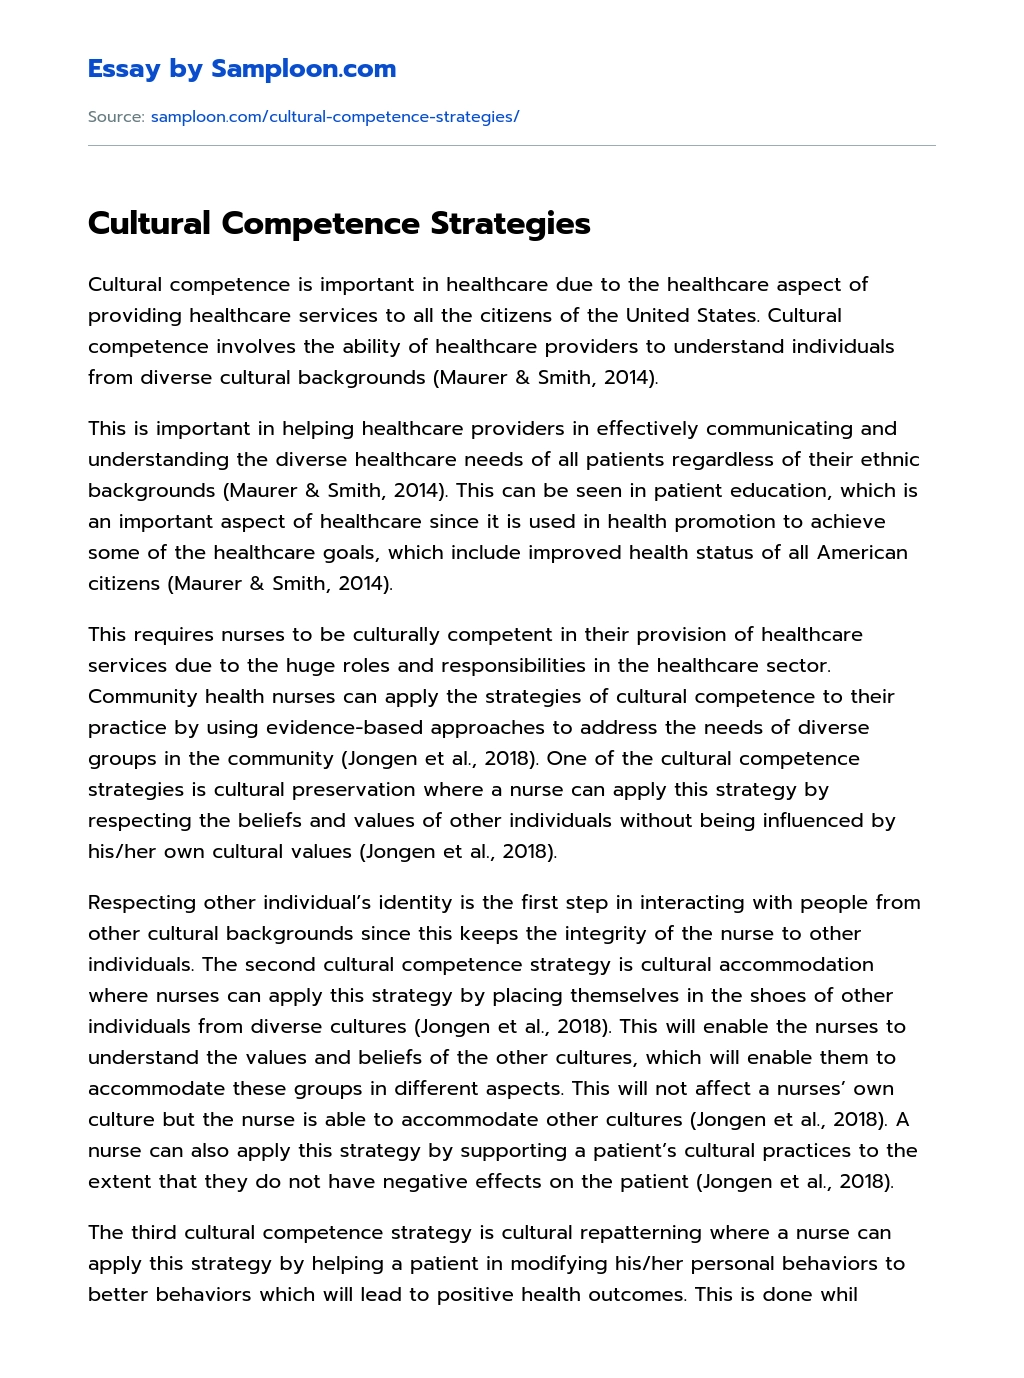 Cultural Competence Strategies essay